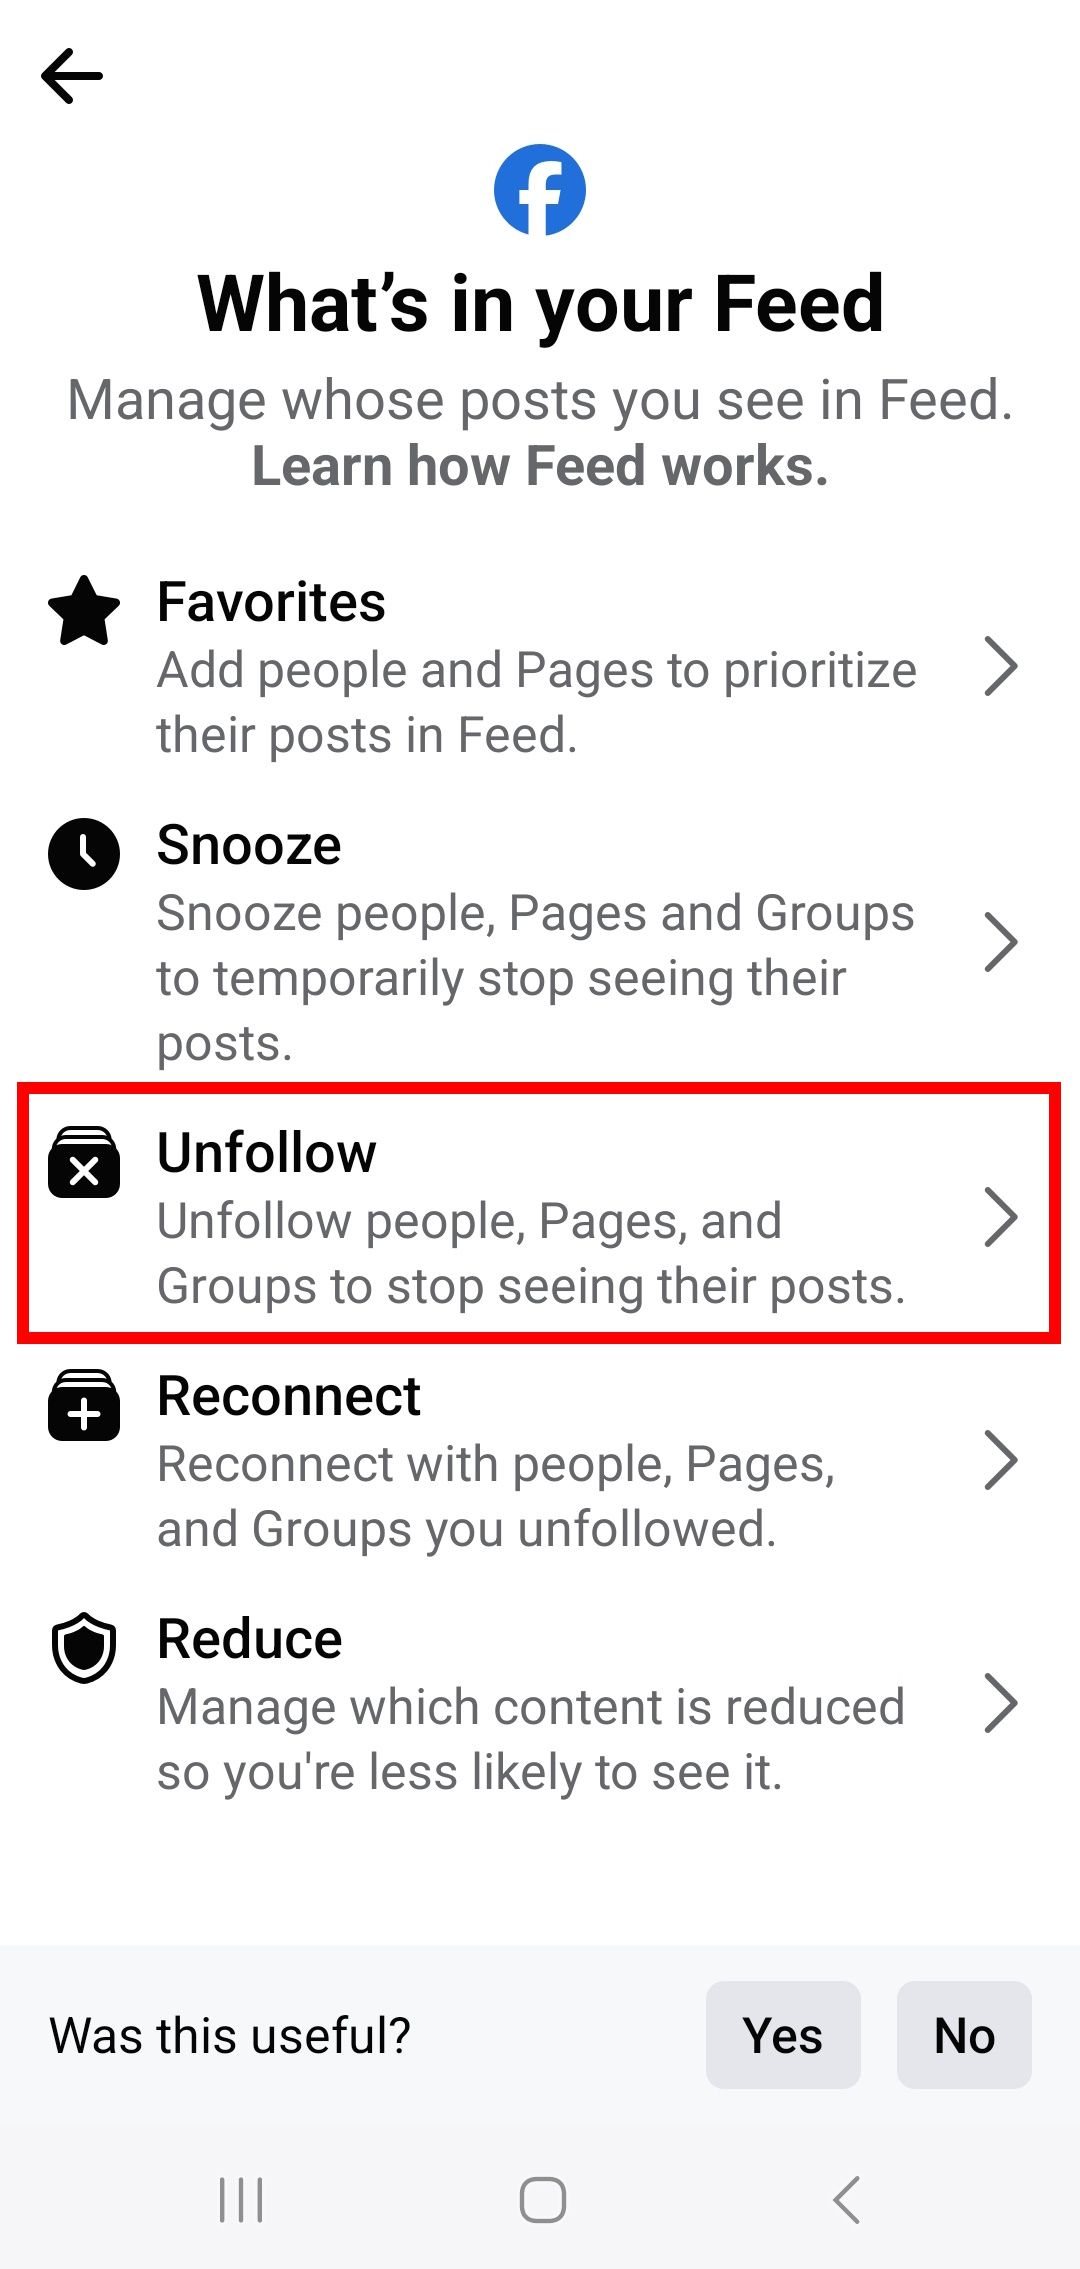 red rectangle outline highlighting unfollow in what's in your feed menu